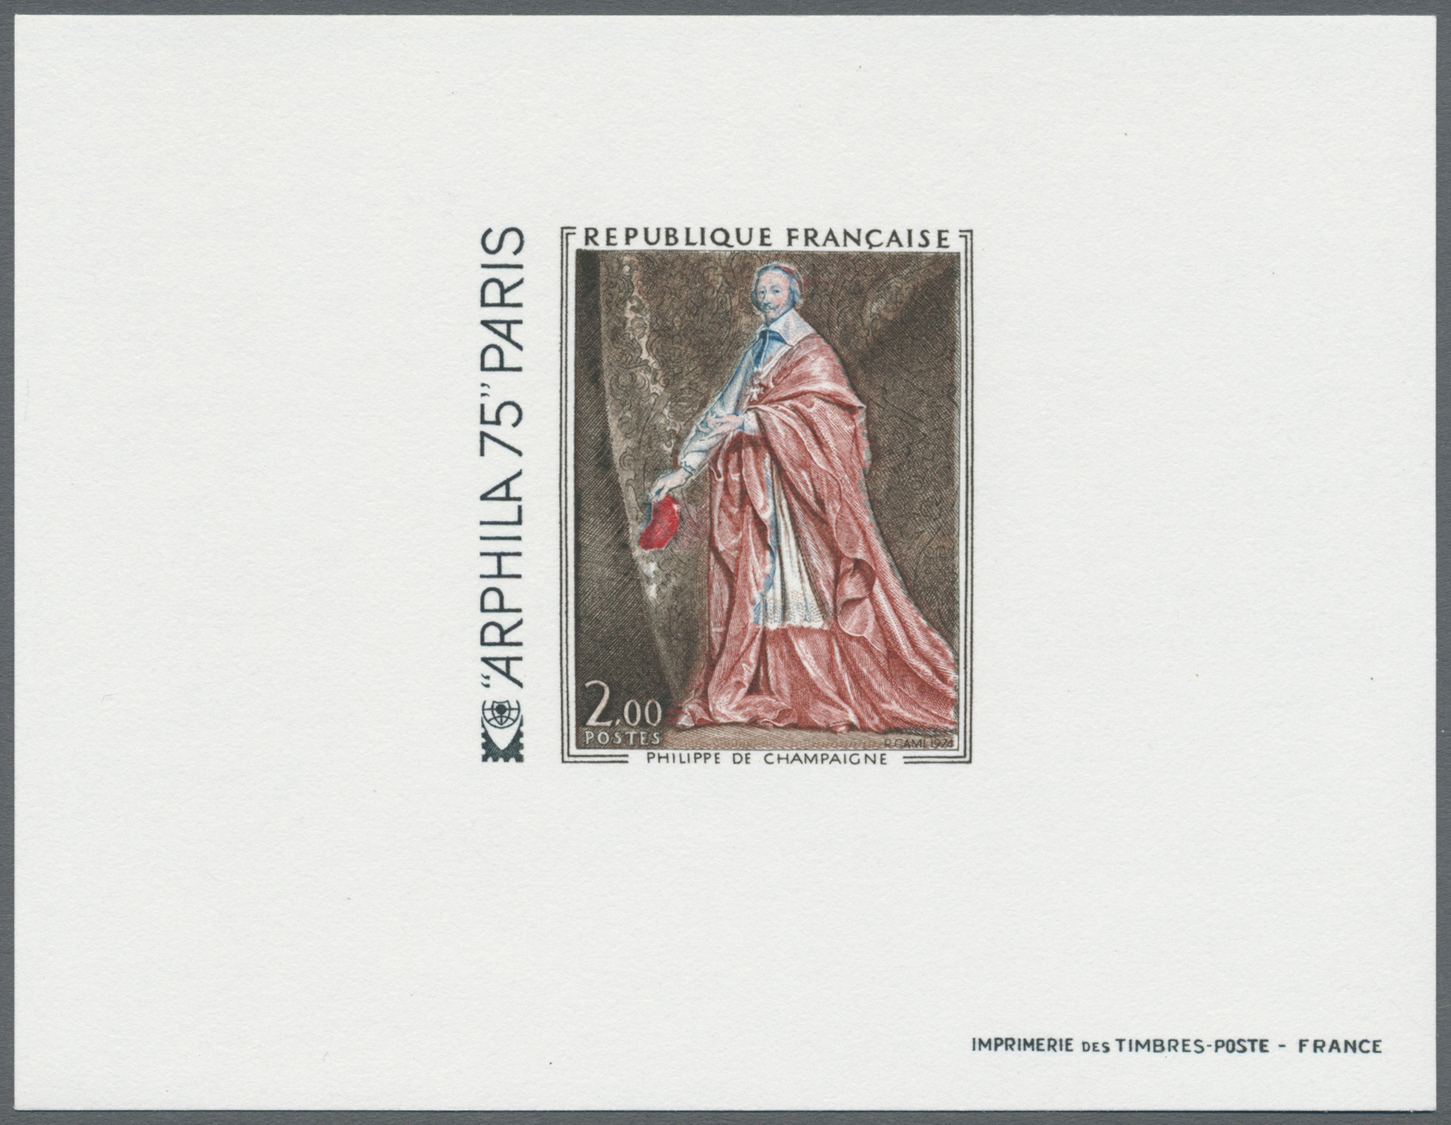 (*) Frankreich: 1975/1991, Collection Of 675 Different Proofs / Epreuves. Very High Catalogue Value. - Usati